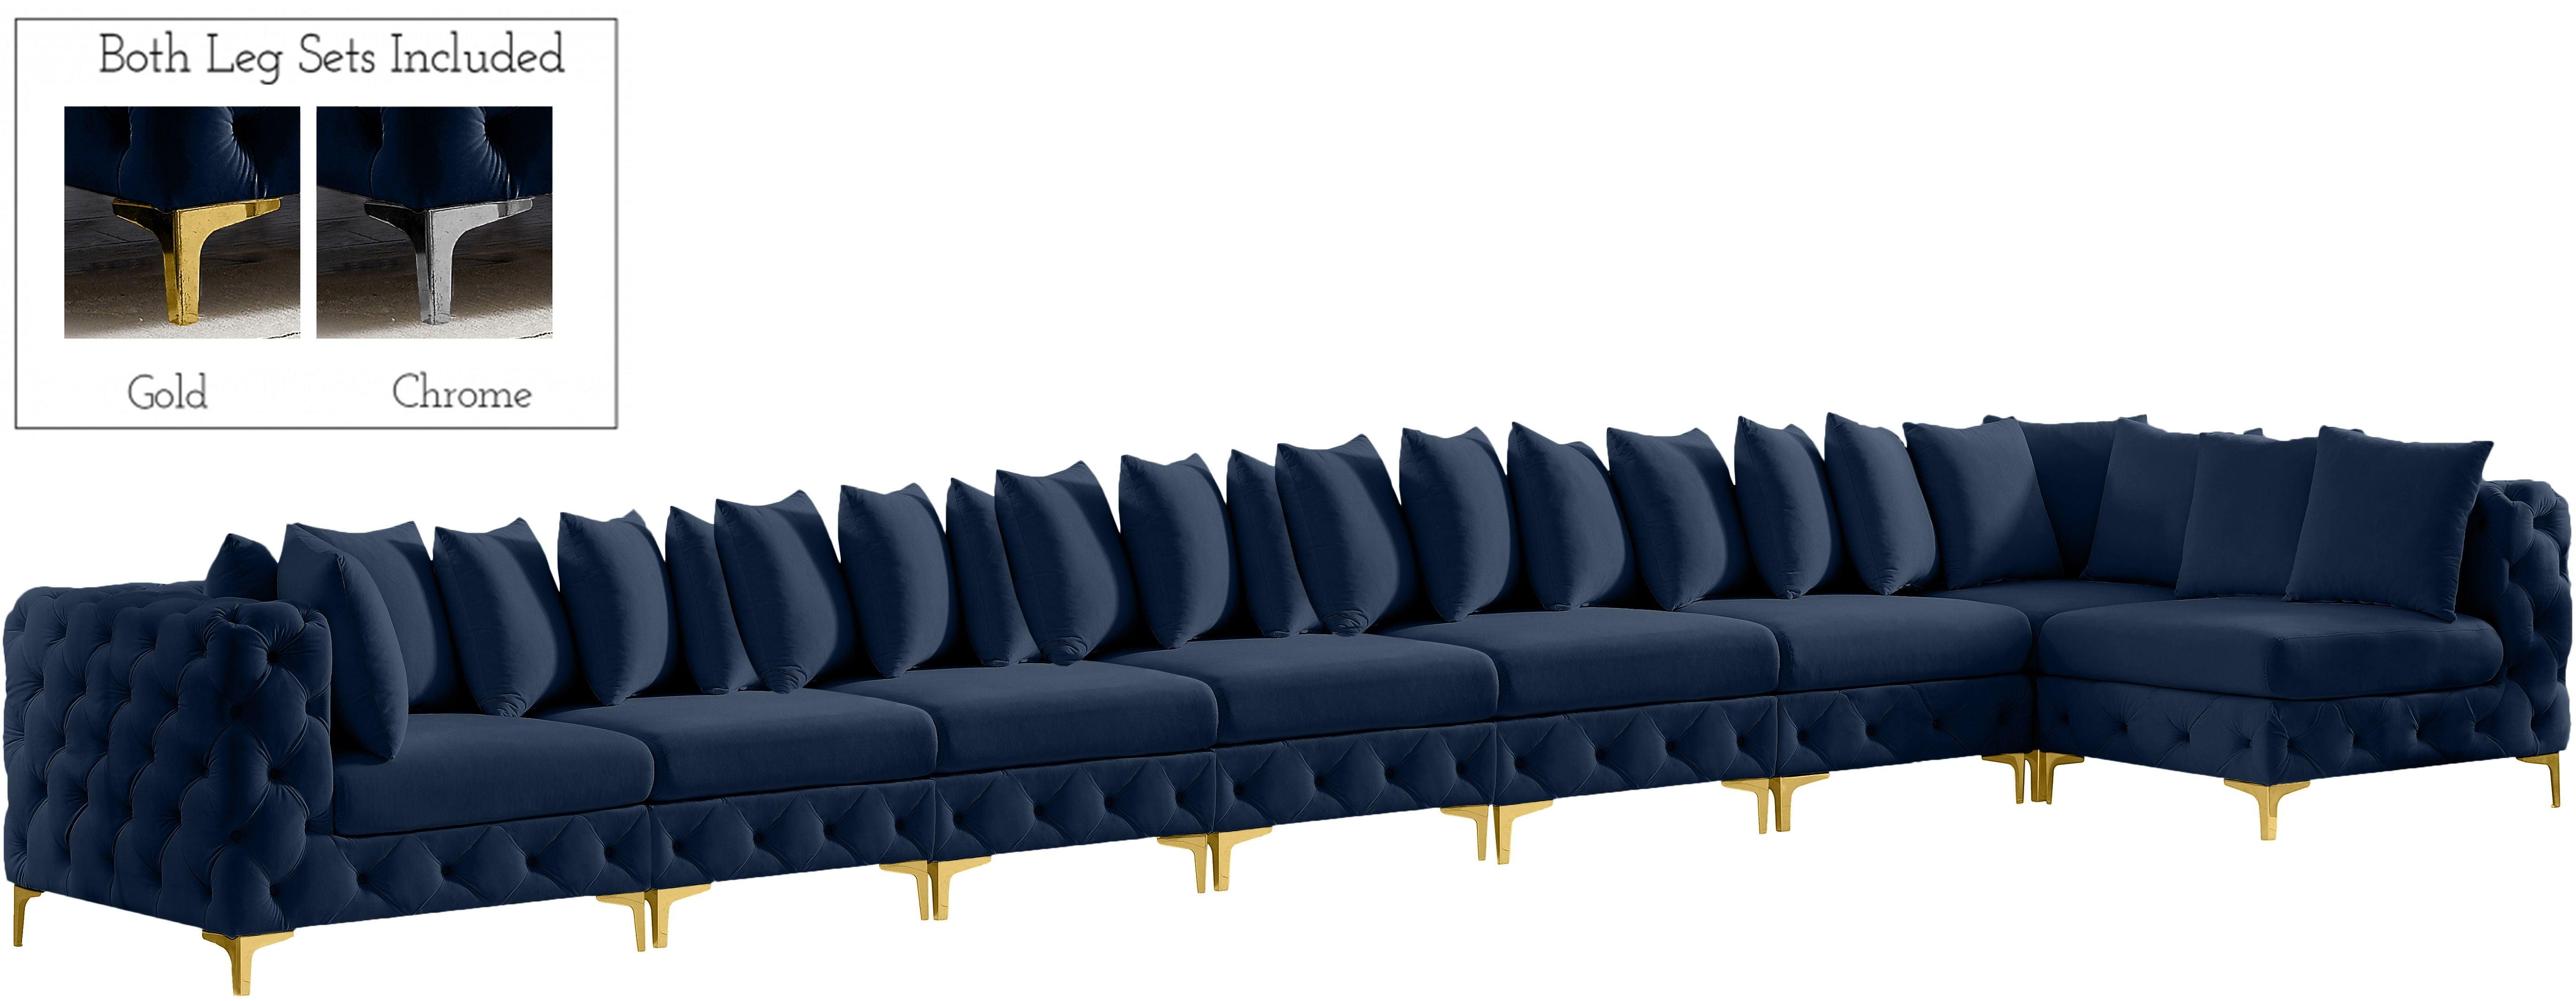 Meridian Furniture - Tremblay - Modular Sectional 8 Piece - Navy - Modern & Contemporary - 5th Avenue Furniture